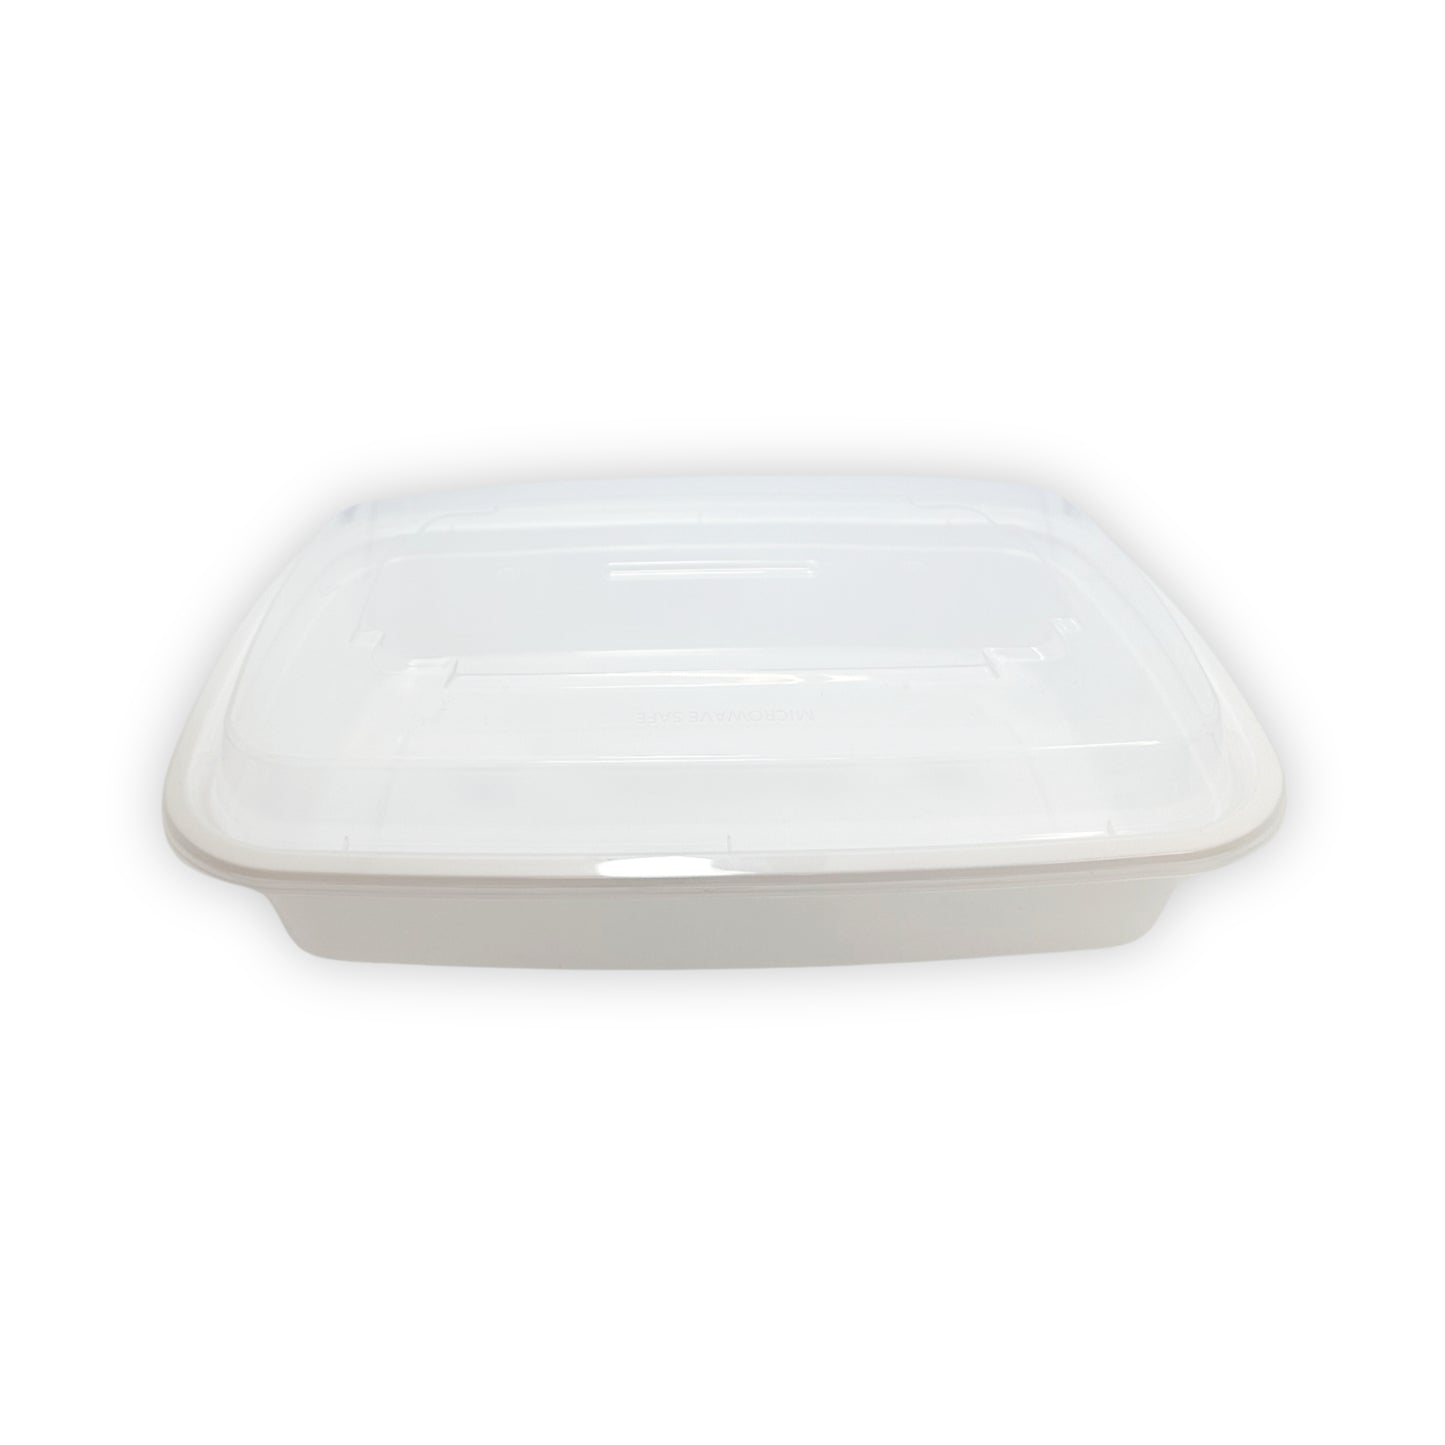 KIS-KY58G | 150sets 58oz, 1715ml White PP Rectangle Container with Clear Lids Combo; $0.404/set